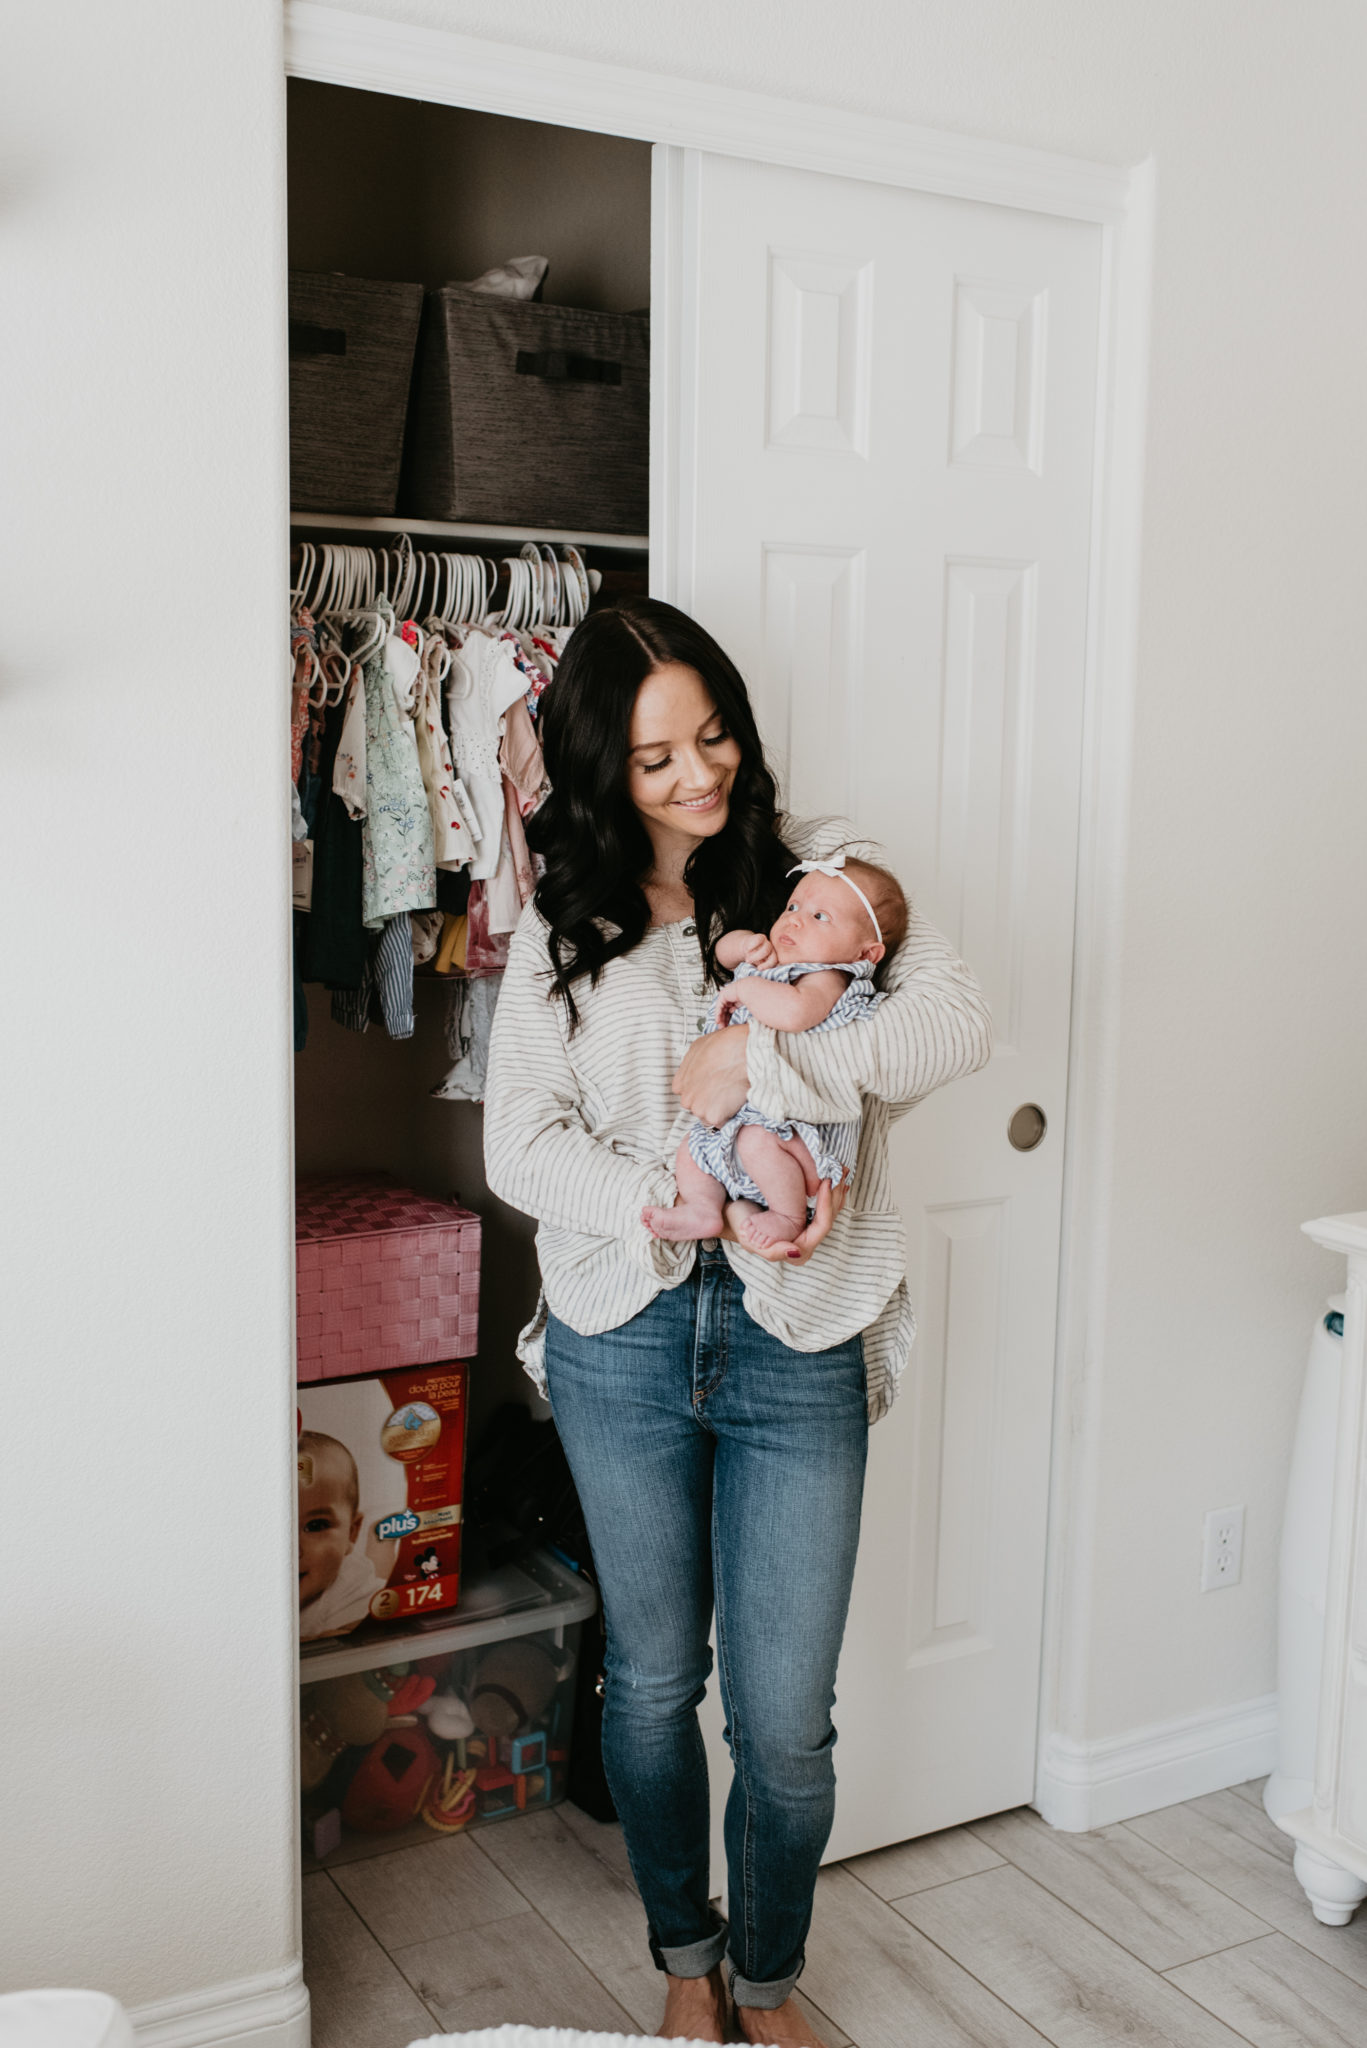 Super Useful Nursery Closet Organization Tips featured by popular Las Vegas mom blogger, Outfits & Outings